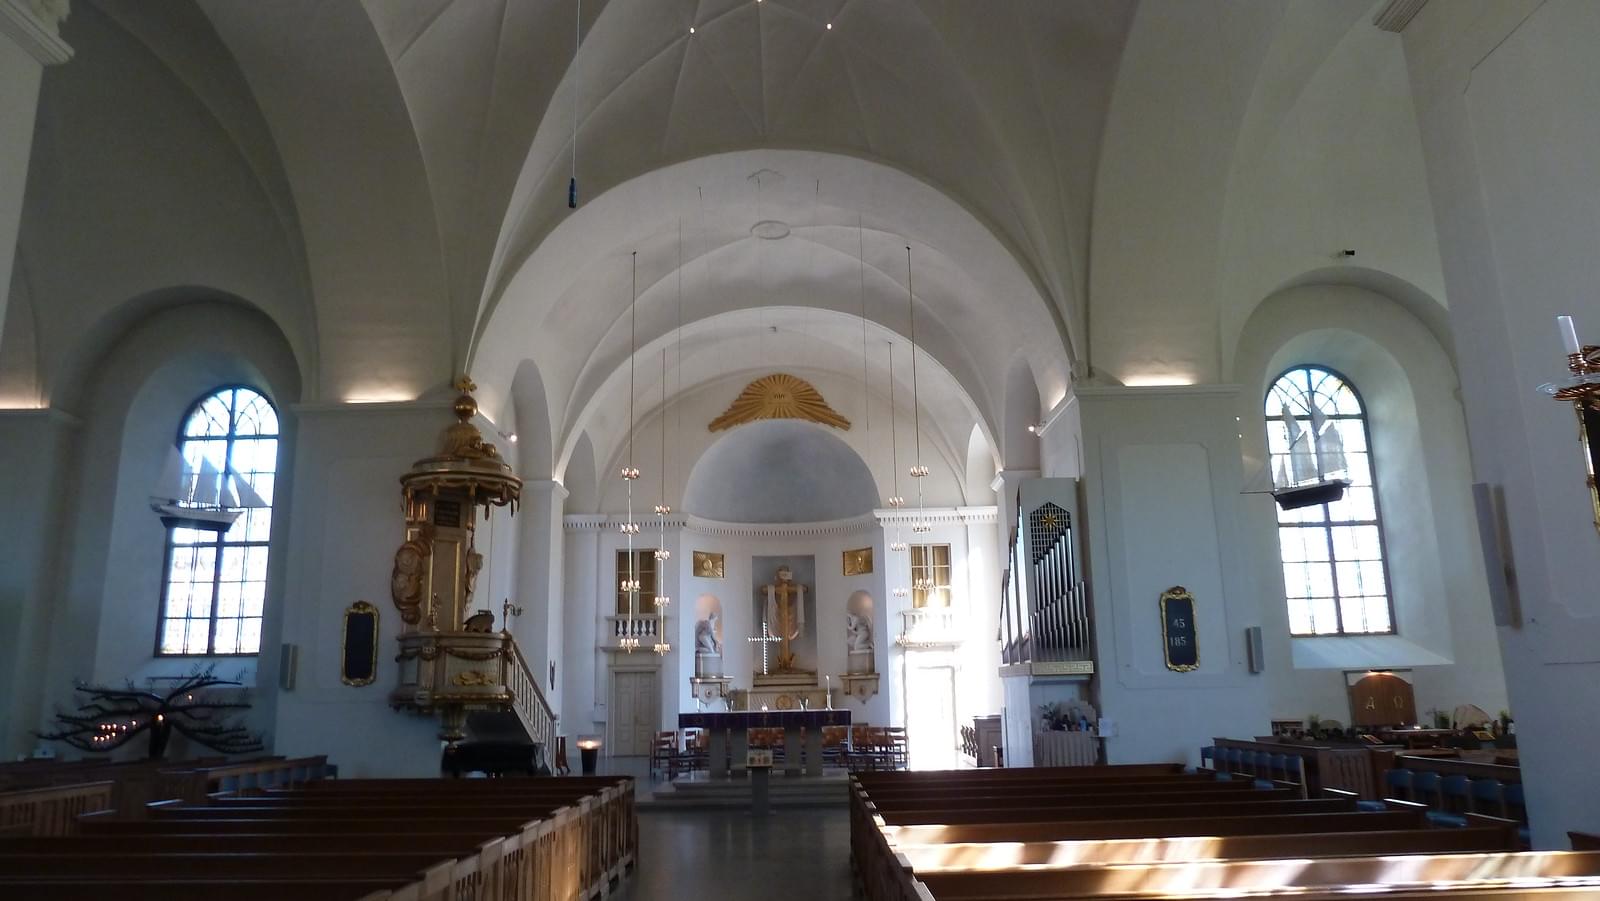 Karlstad Cathedral Overview